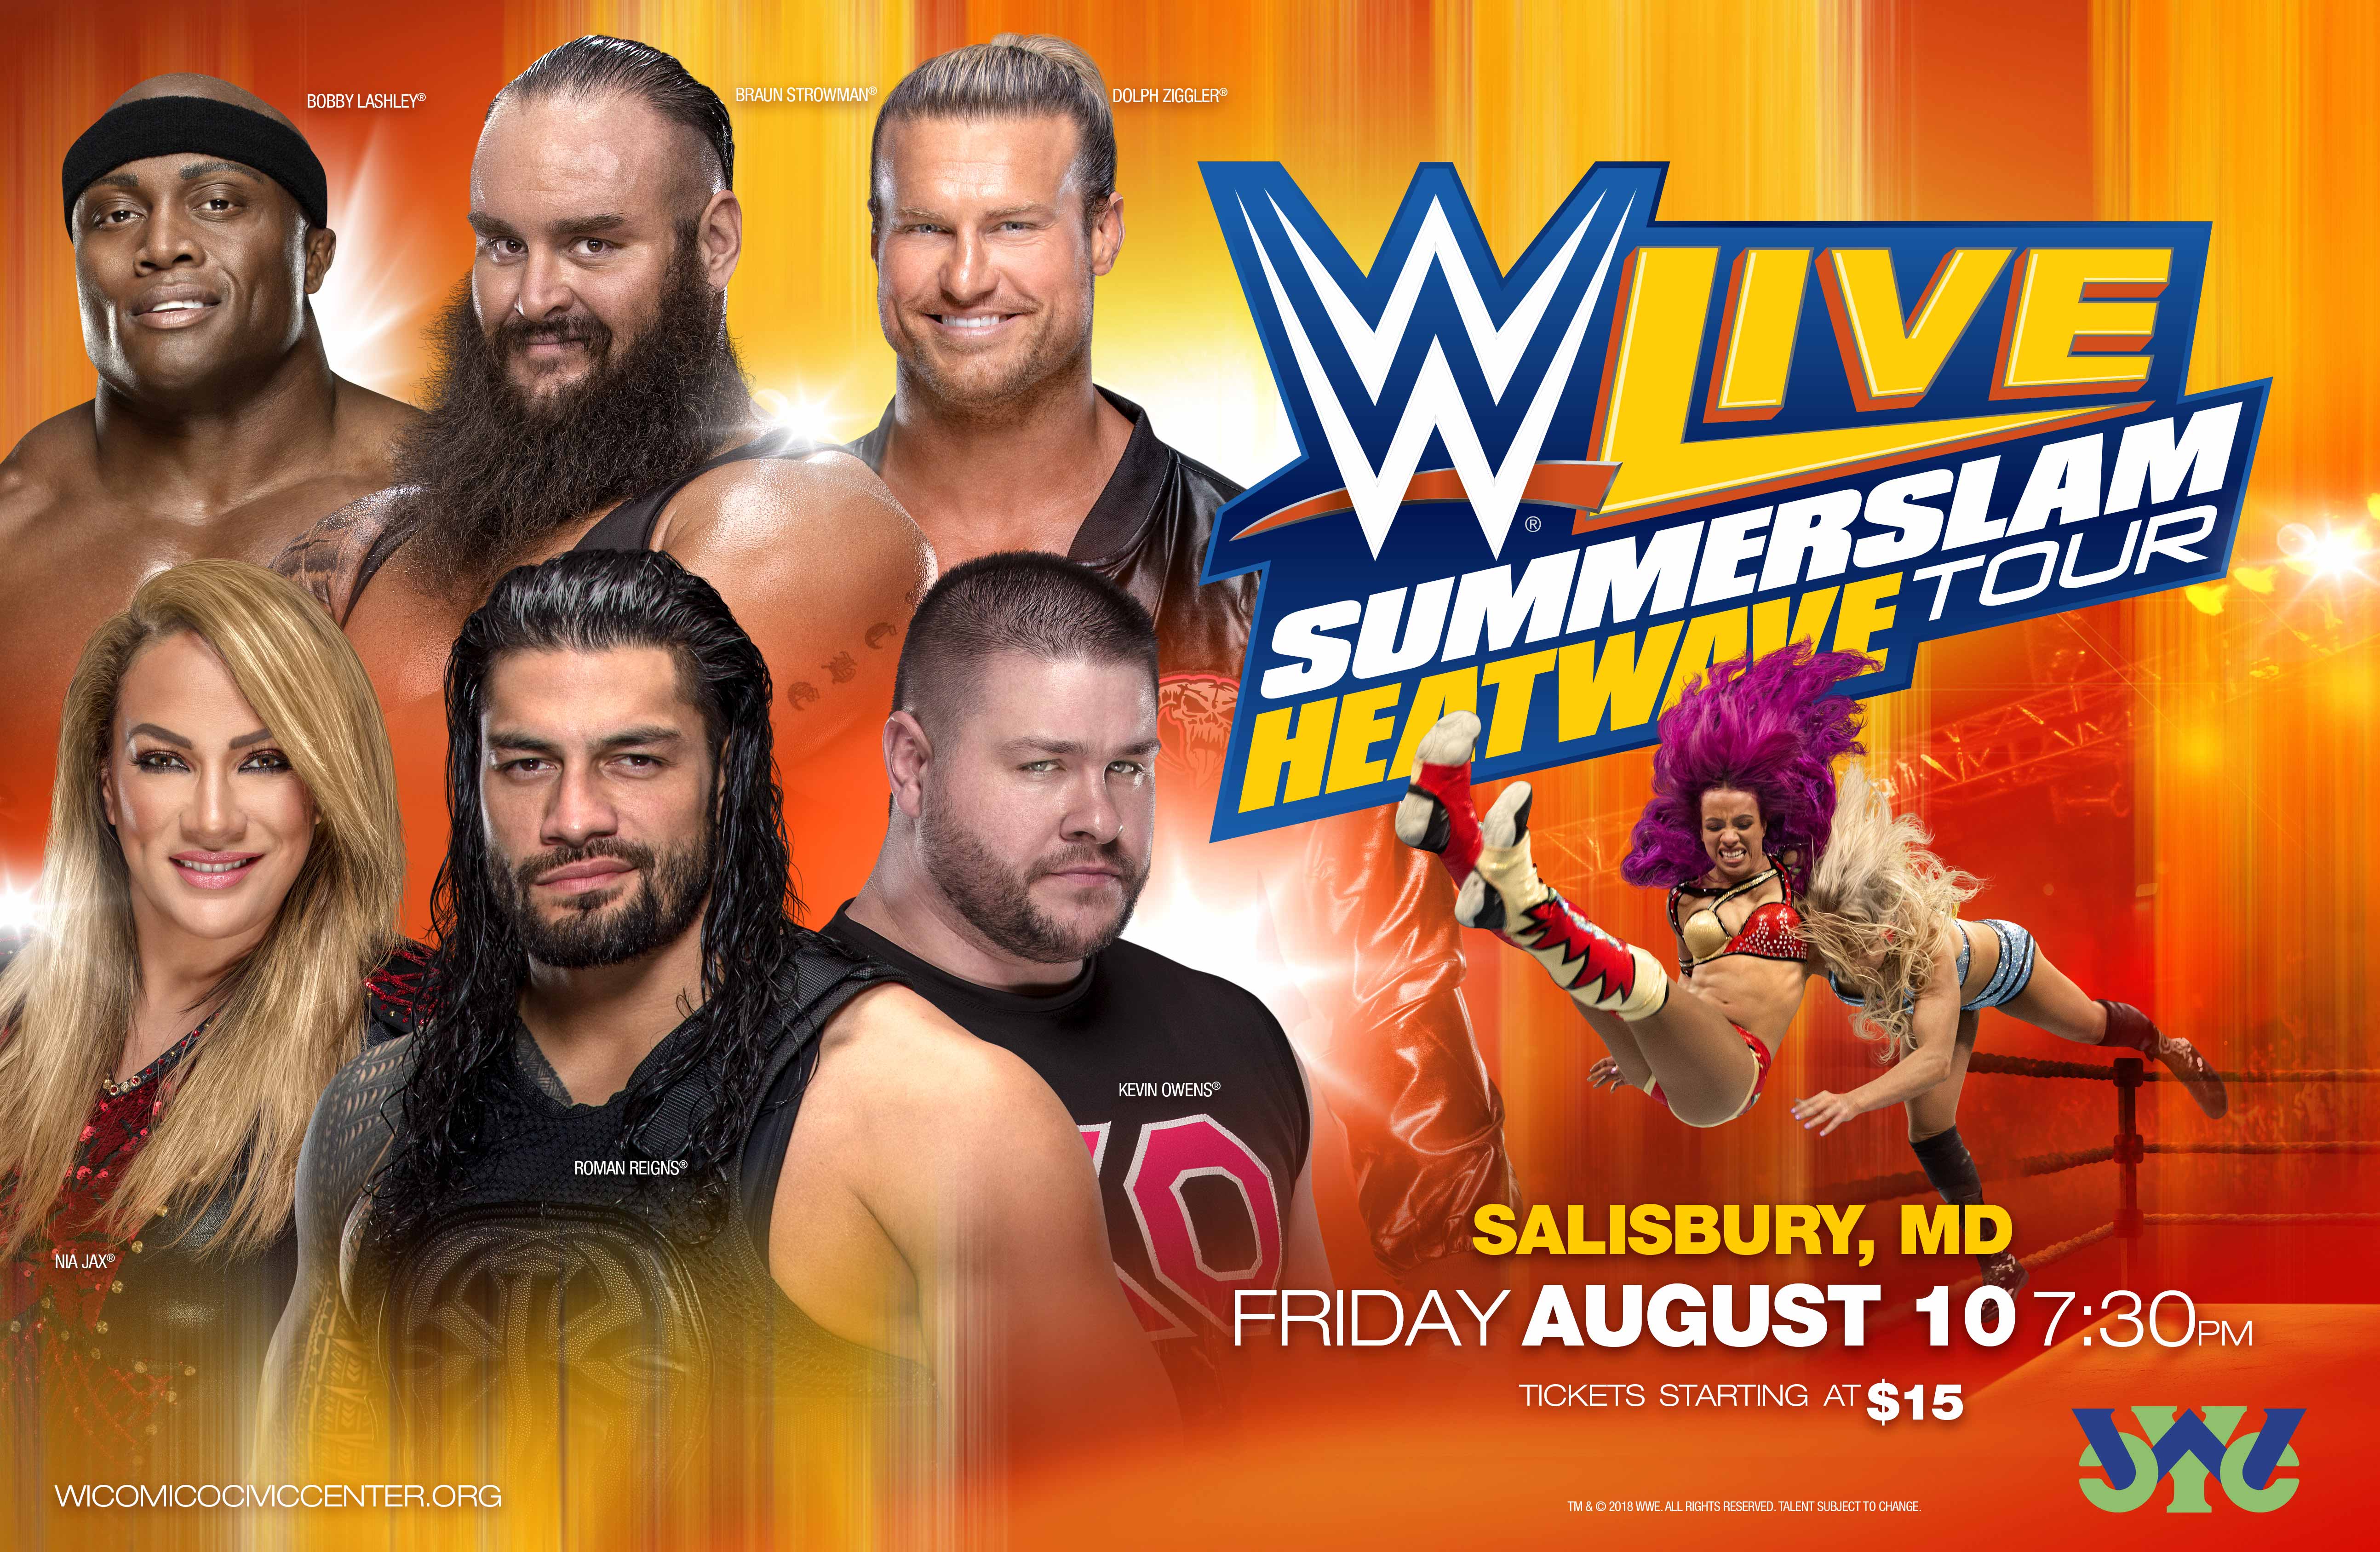 WWE Live SummerSlam Heatwave Tour stops at the WY&CC Friday, Aug. 10 SBJ